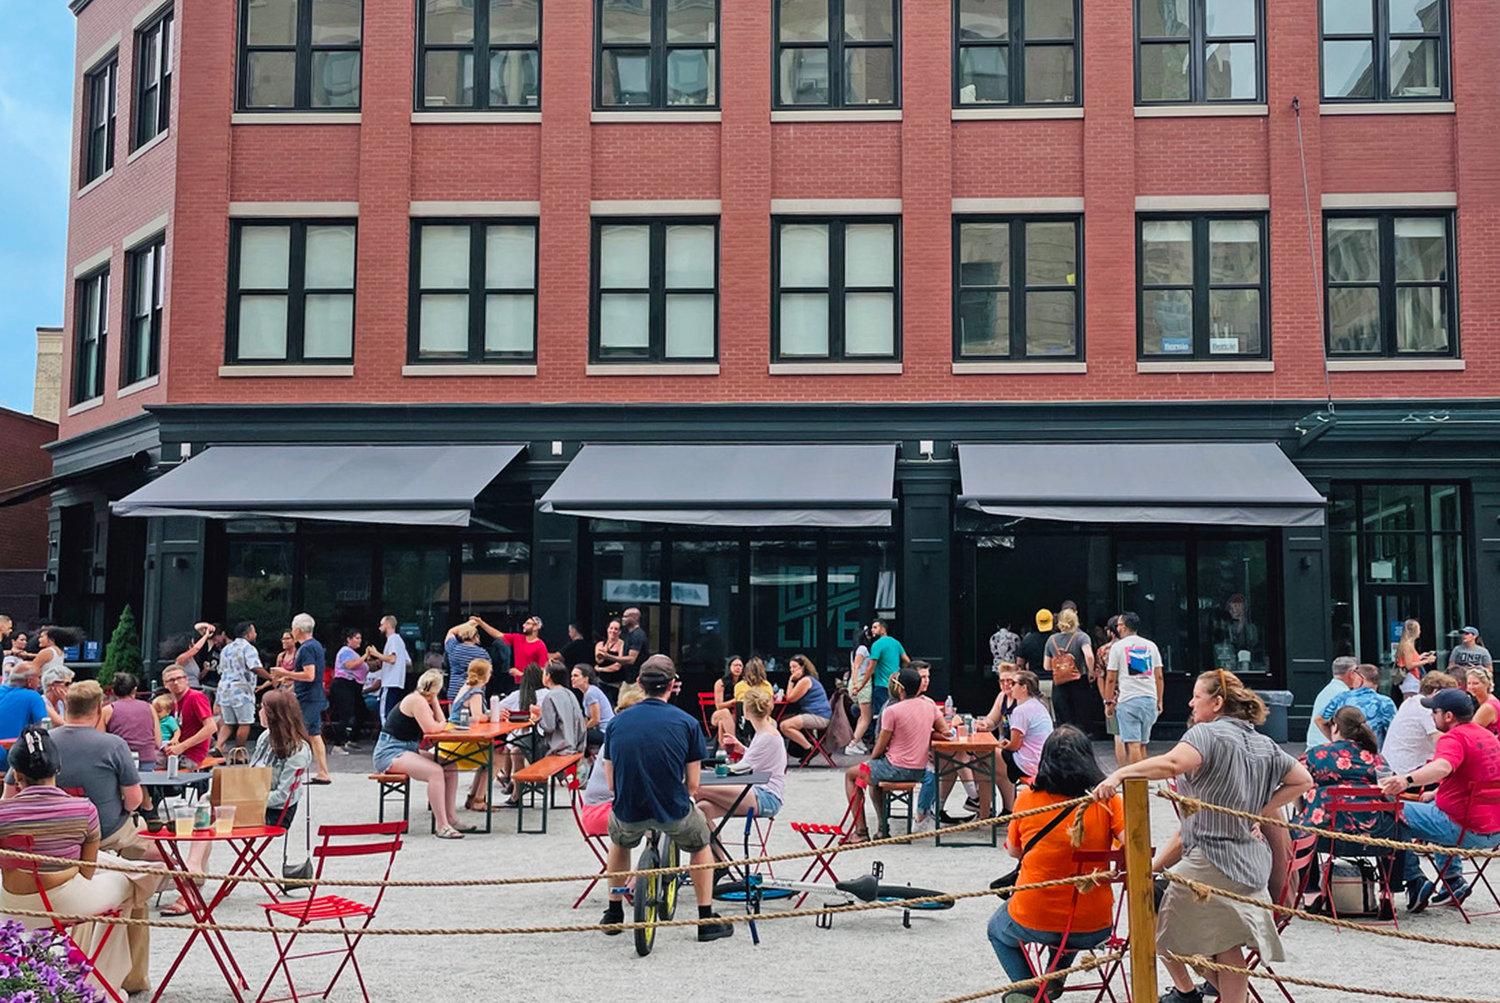 Long Live Beergarden pops up downtown for Open Air Saturdays